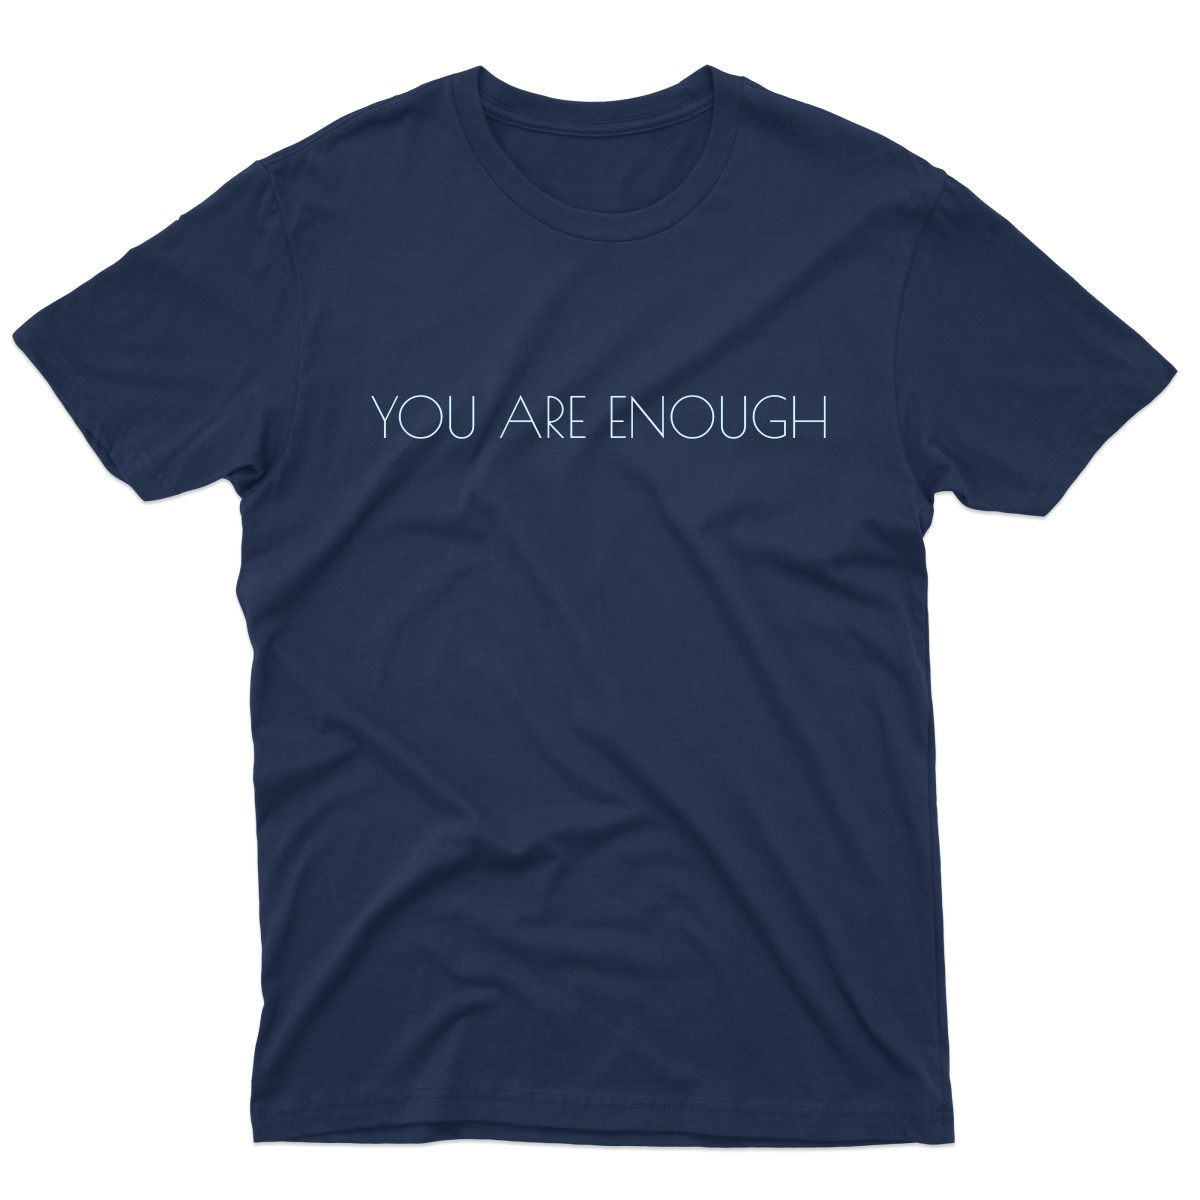 You are enough Men's T-shirt | Navy